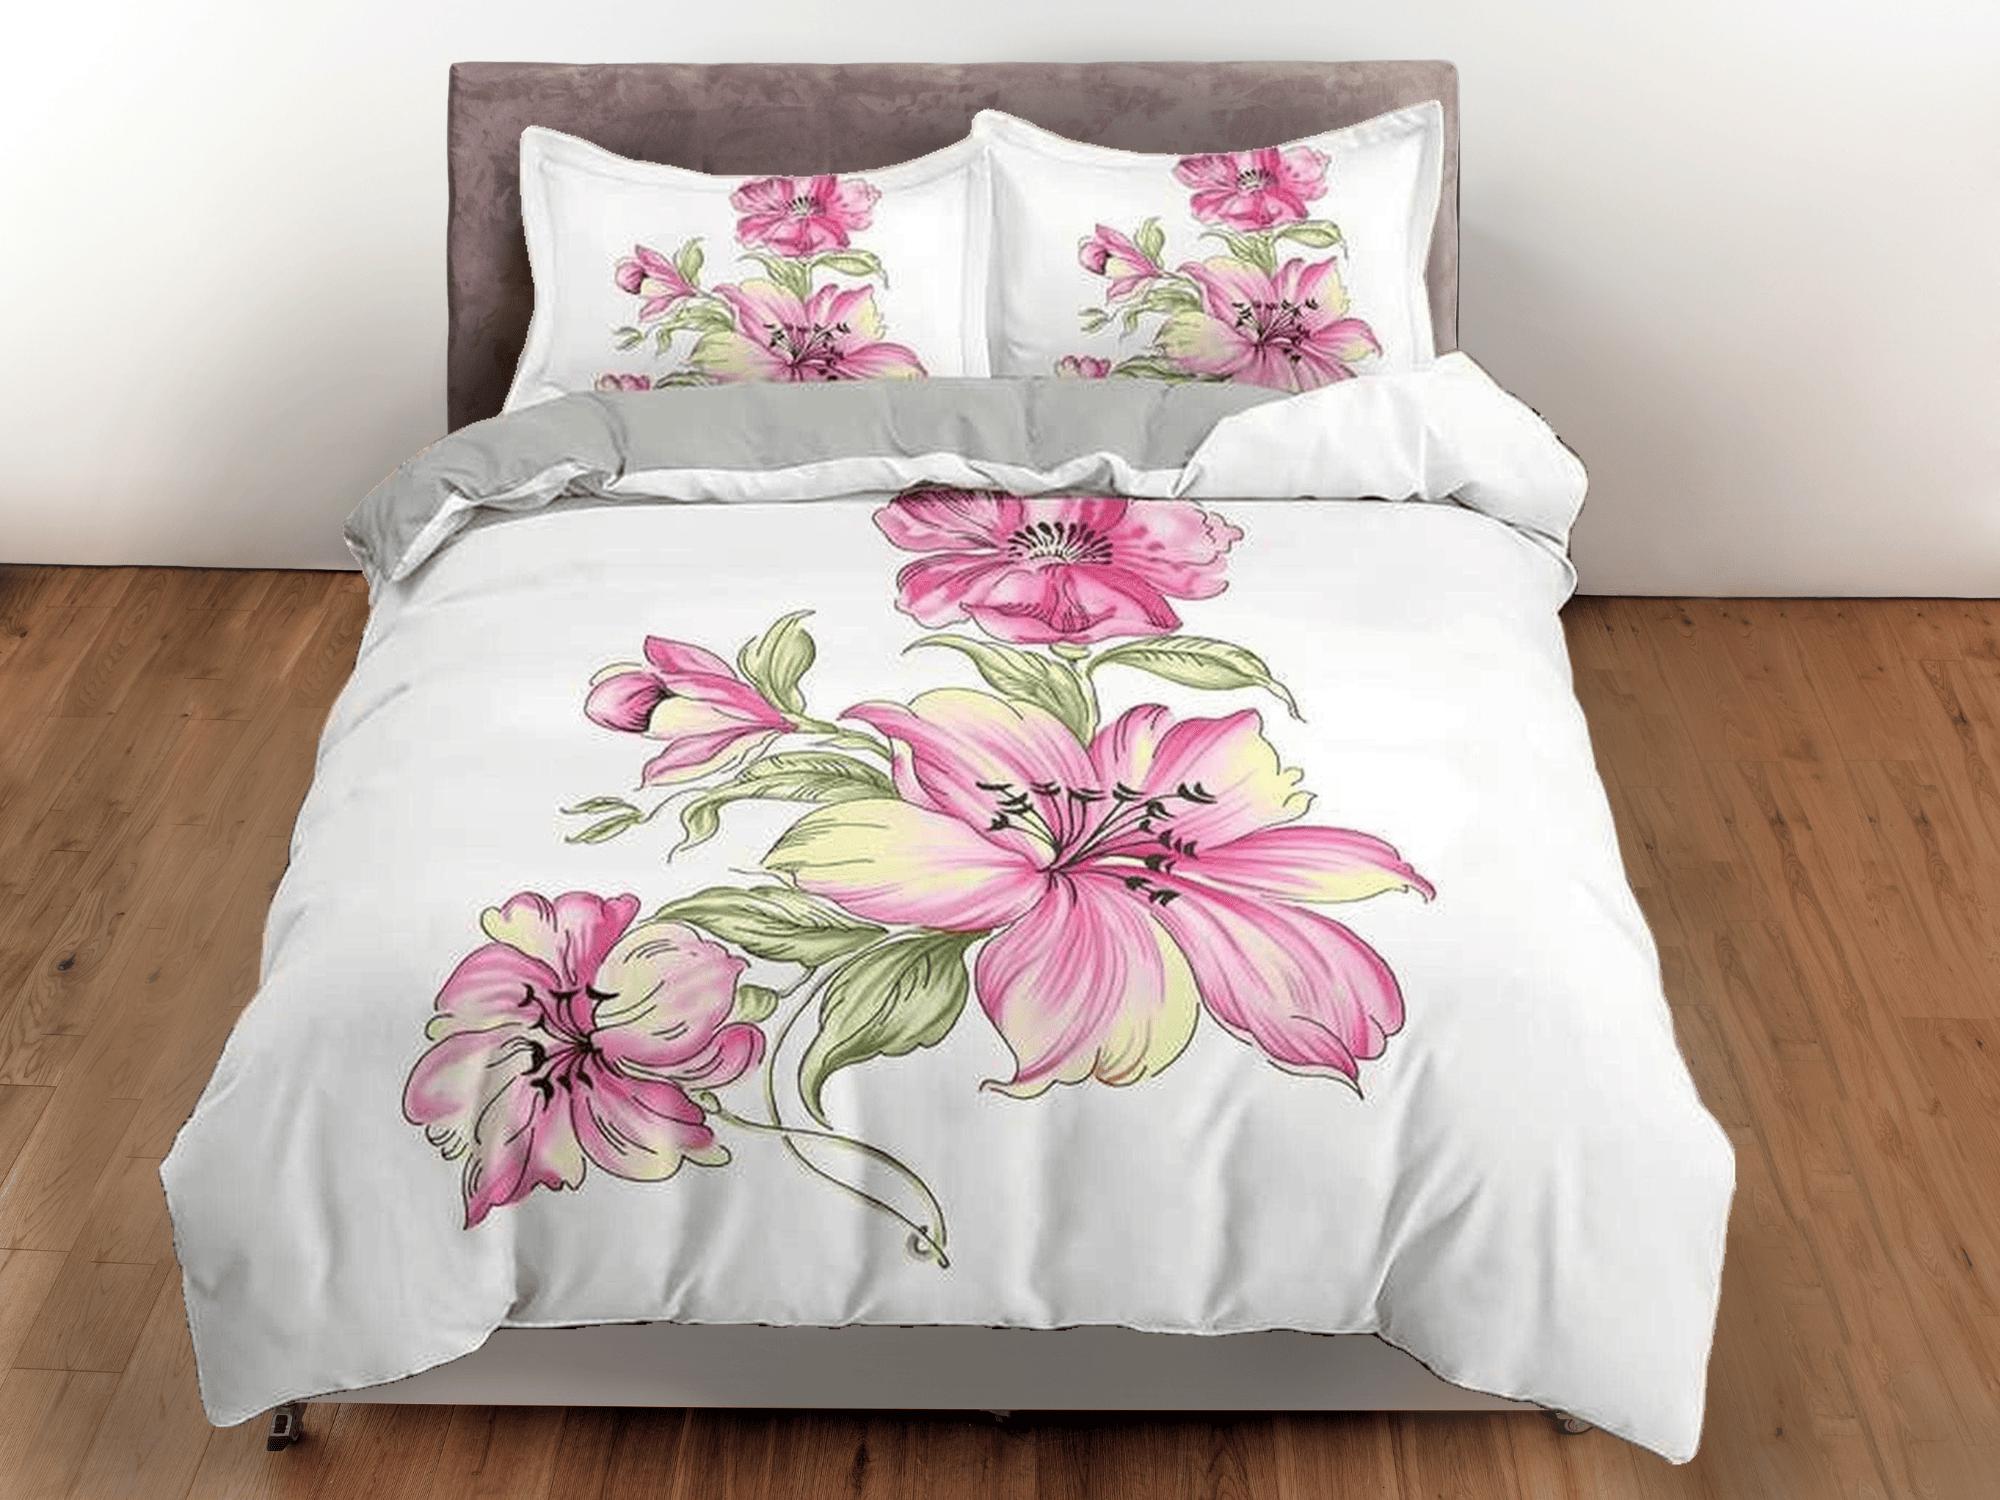 daintyduvet Pink lily floral duvet cover colorful bedding, teen girl bedroom, baby girl crib bedding boho maximalist bedspread aesthetic bedding